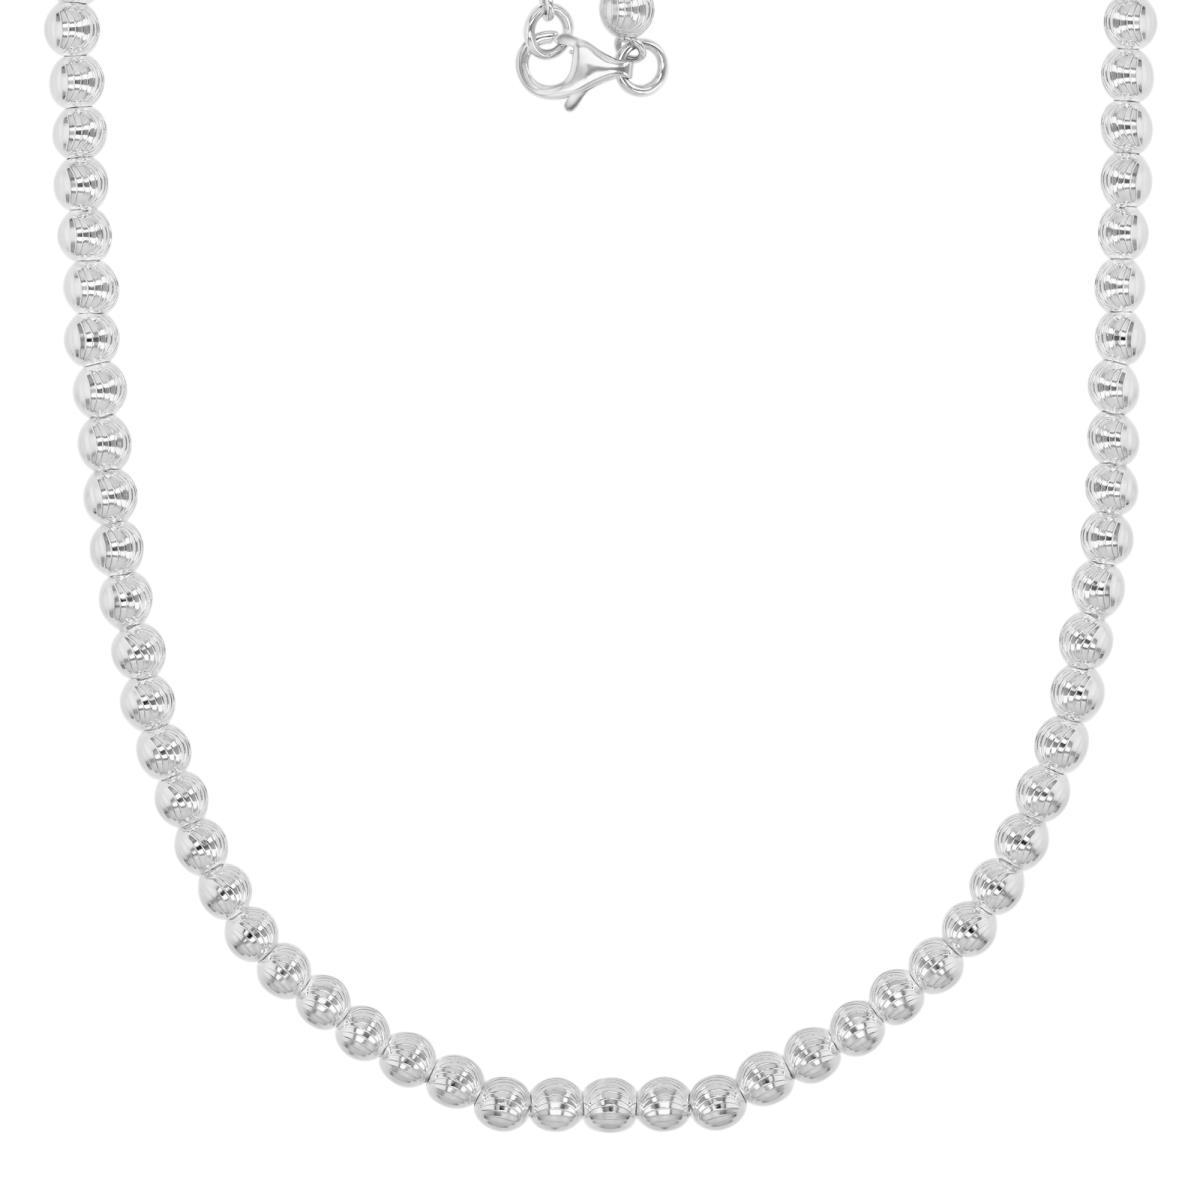 Sterling Silver Anti-Tarnish 4MM Polished & Diamond Cut Bead Link 20" Chain Necklace